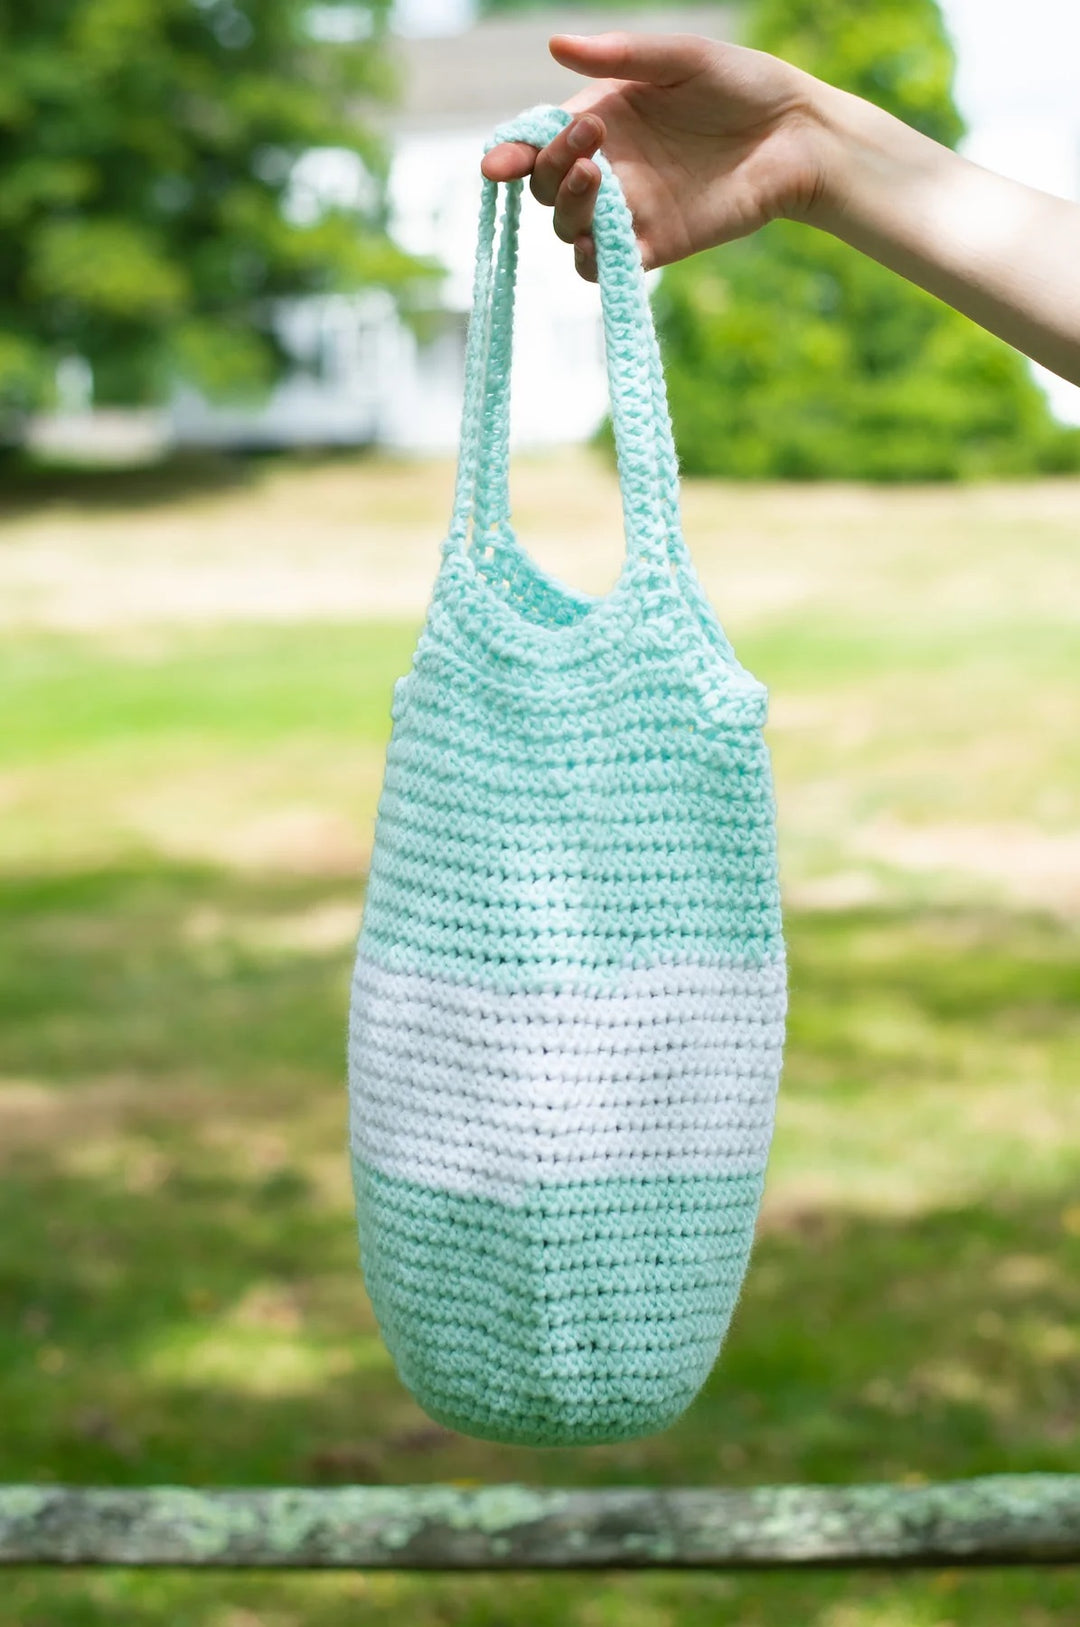 2-in-1 Crochet Storage Bucket and Bag for Yarn - Free Pattern - Nicki's  Homemade Crafts